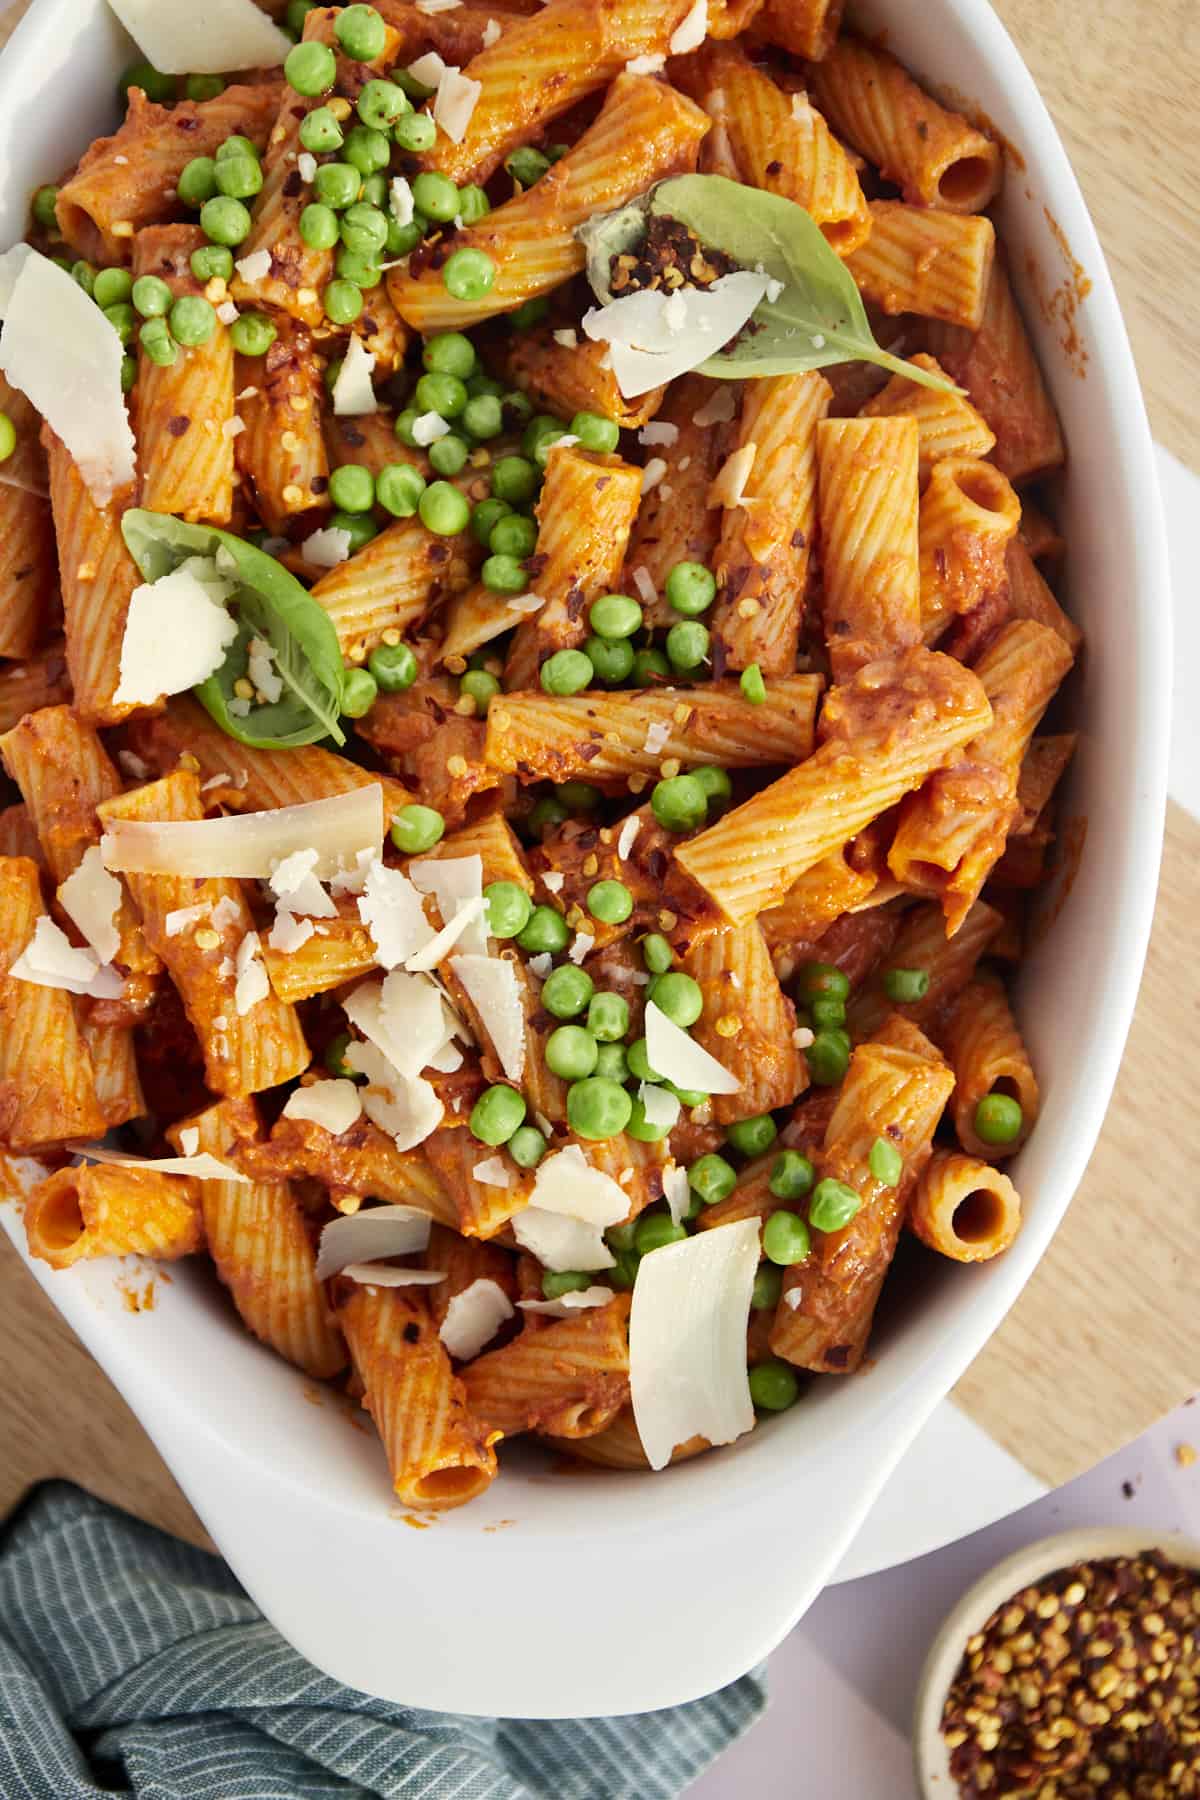 baked spicy rigatoni with peas and shredded parmesan